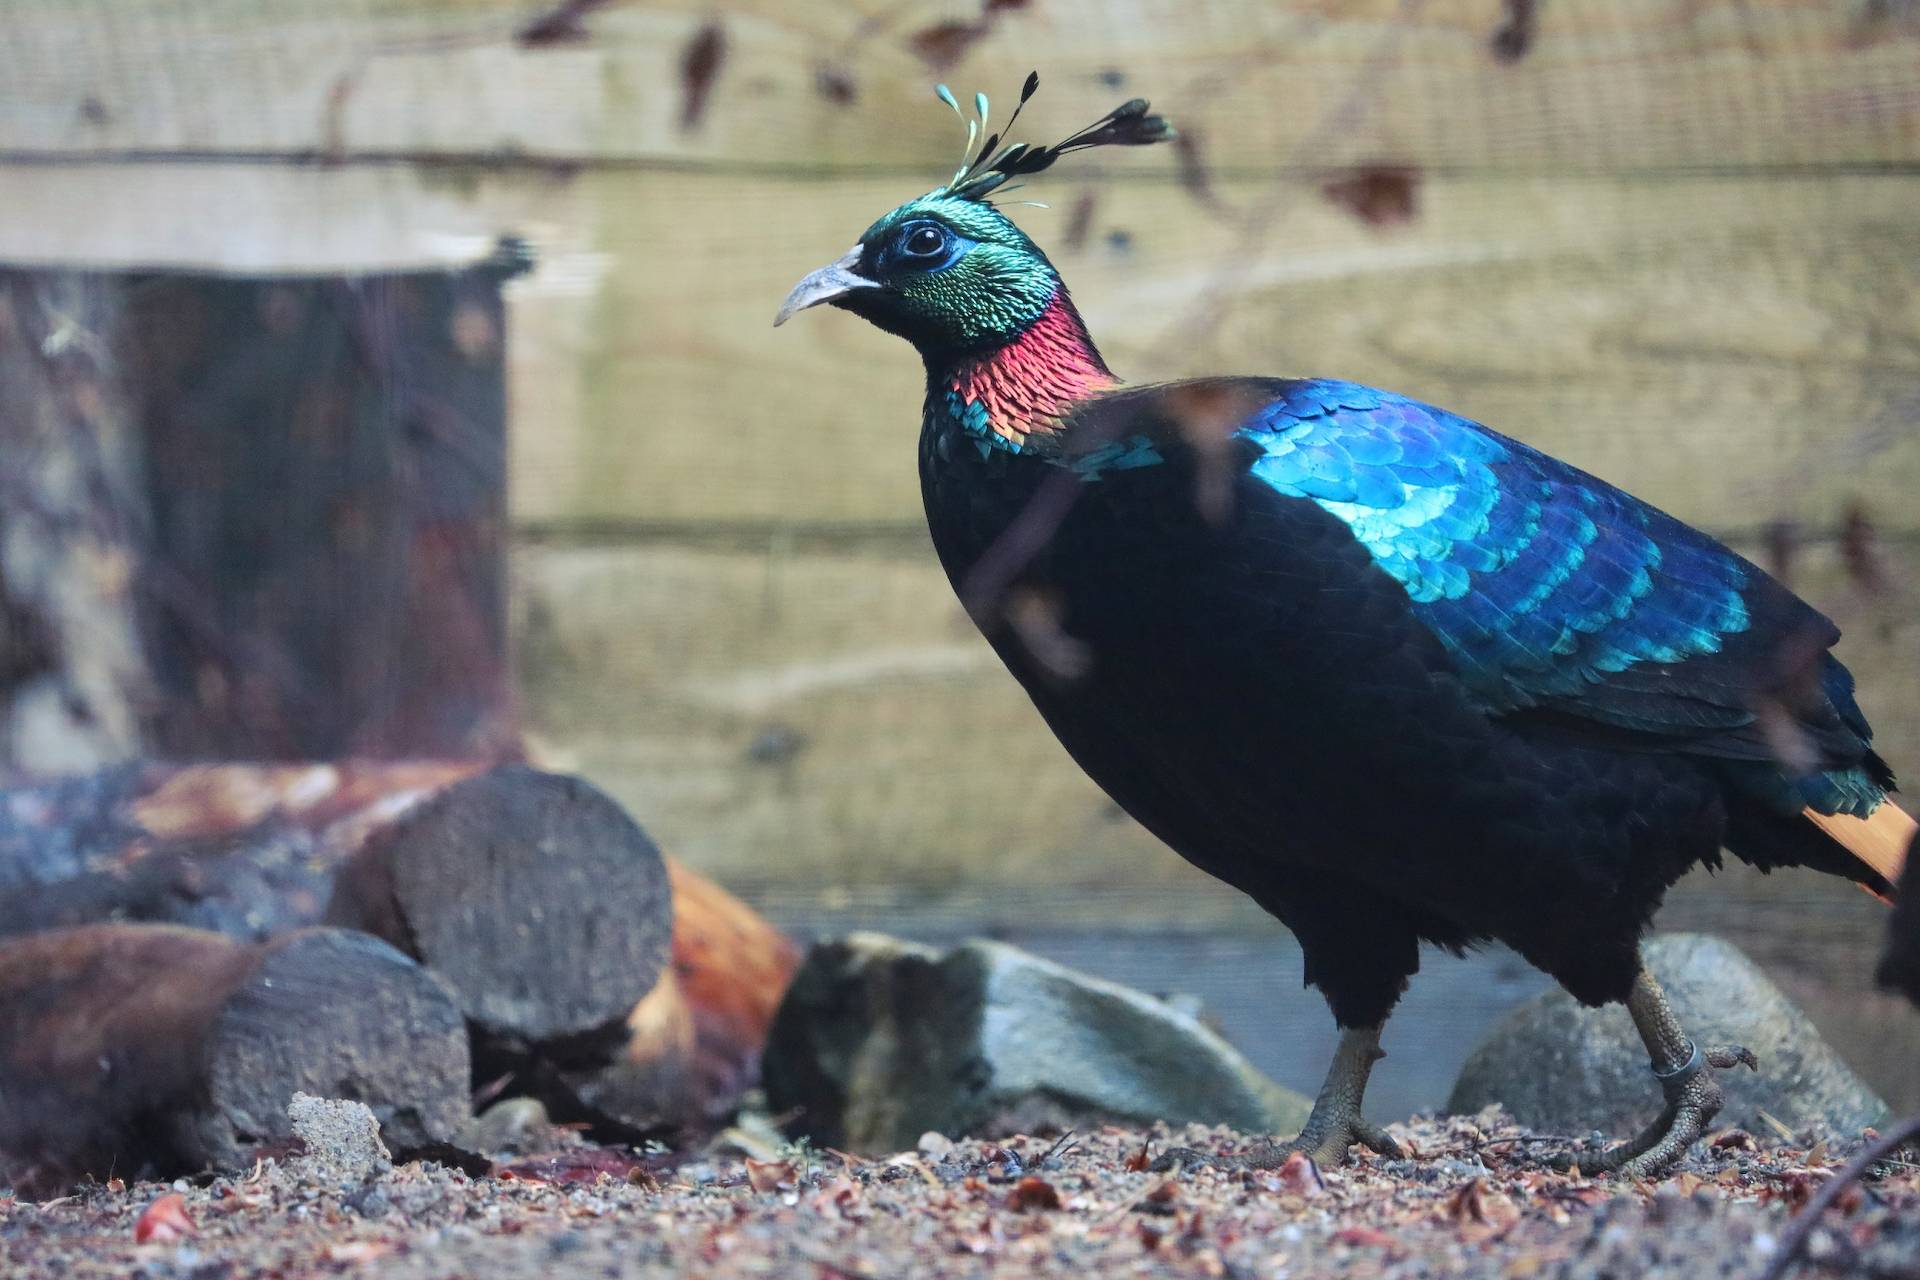 A male Himalayan monal walking to the left. He is brightly coloured with blue feathers IMAGE: Jessica Wise 2019